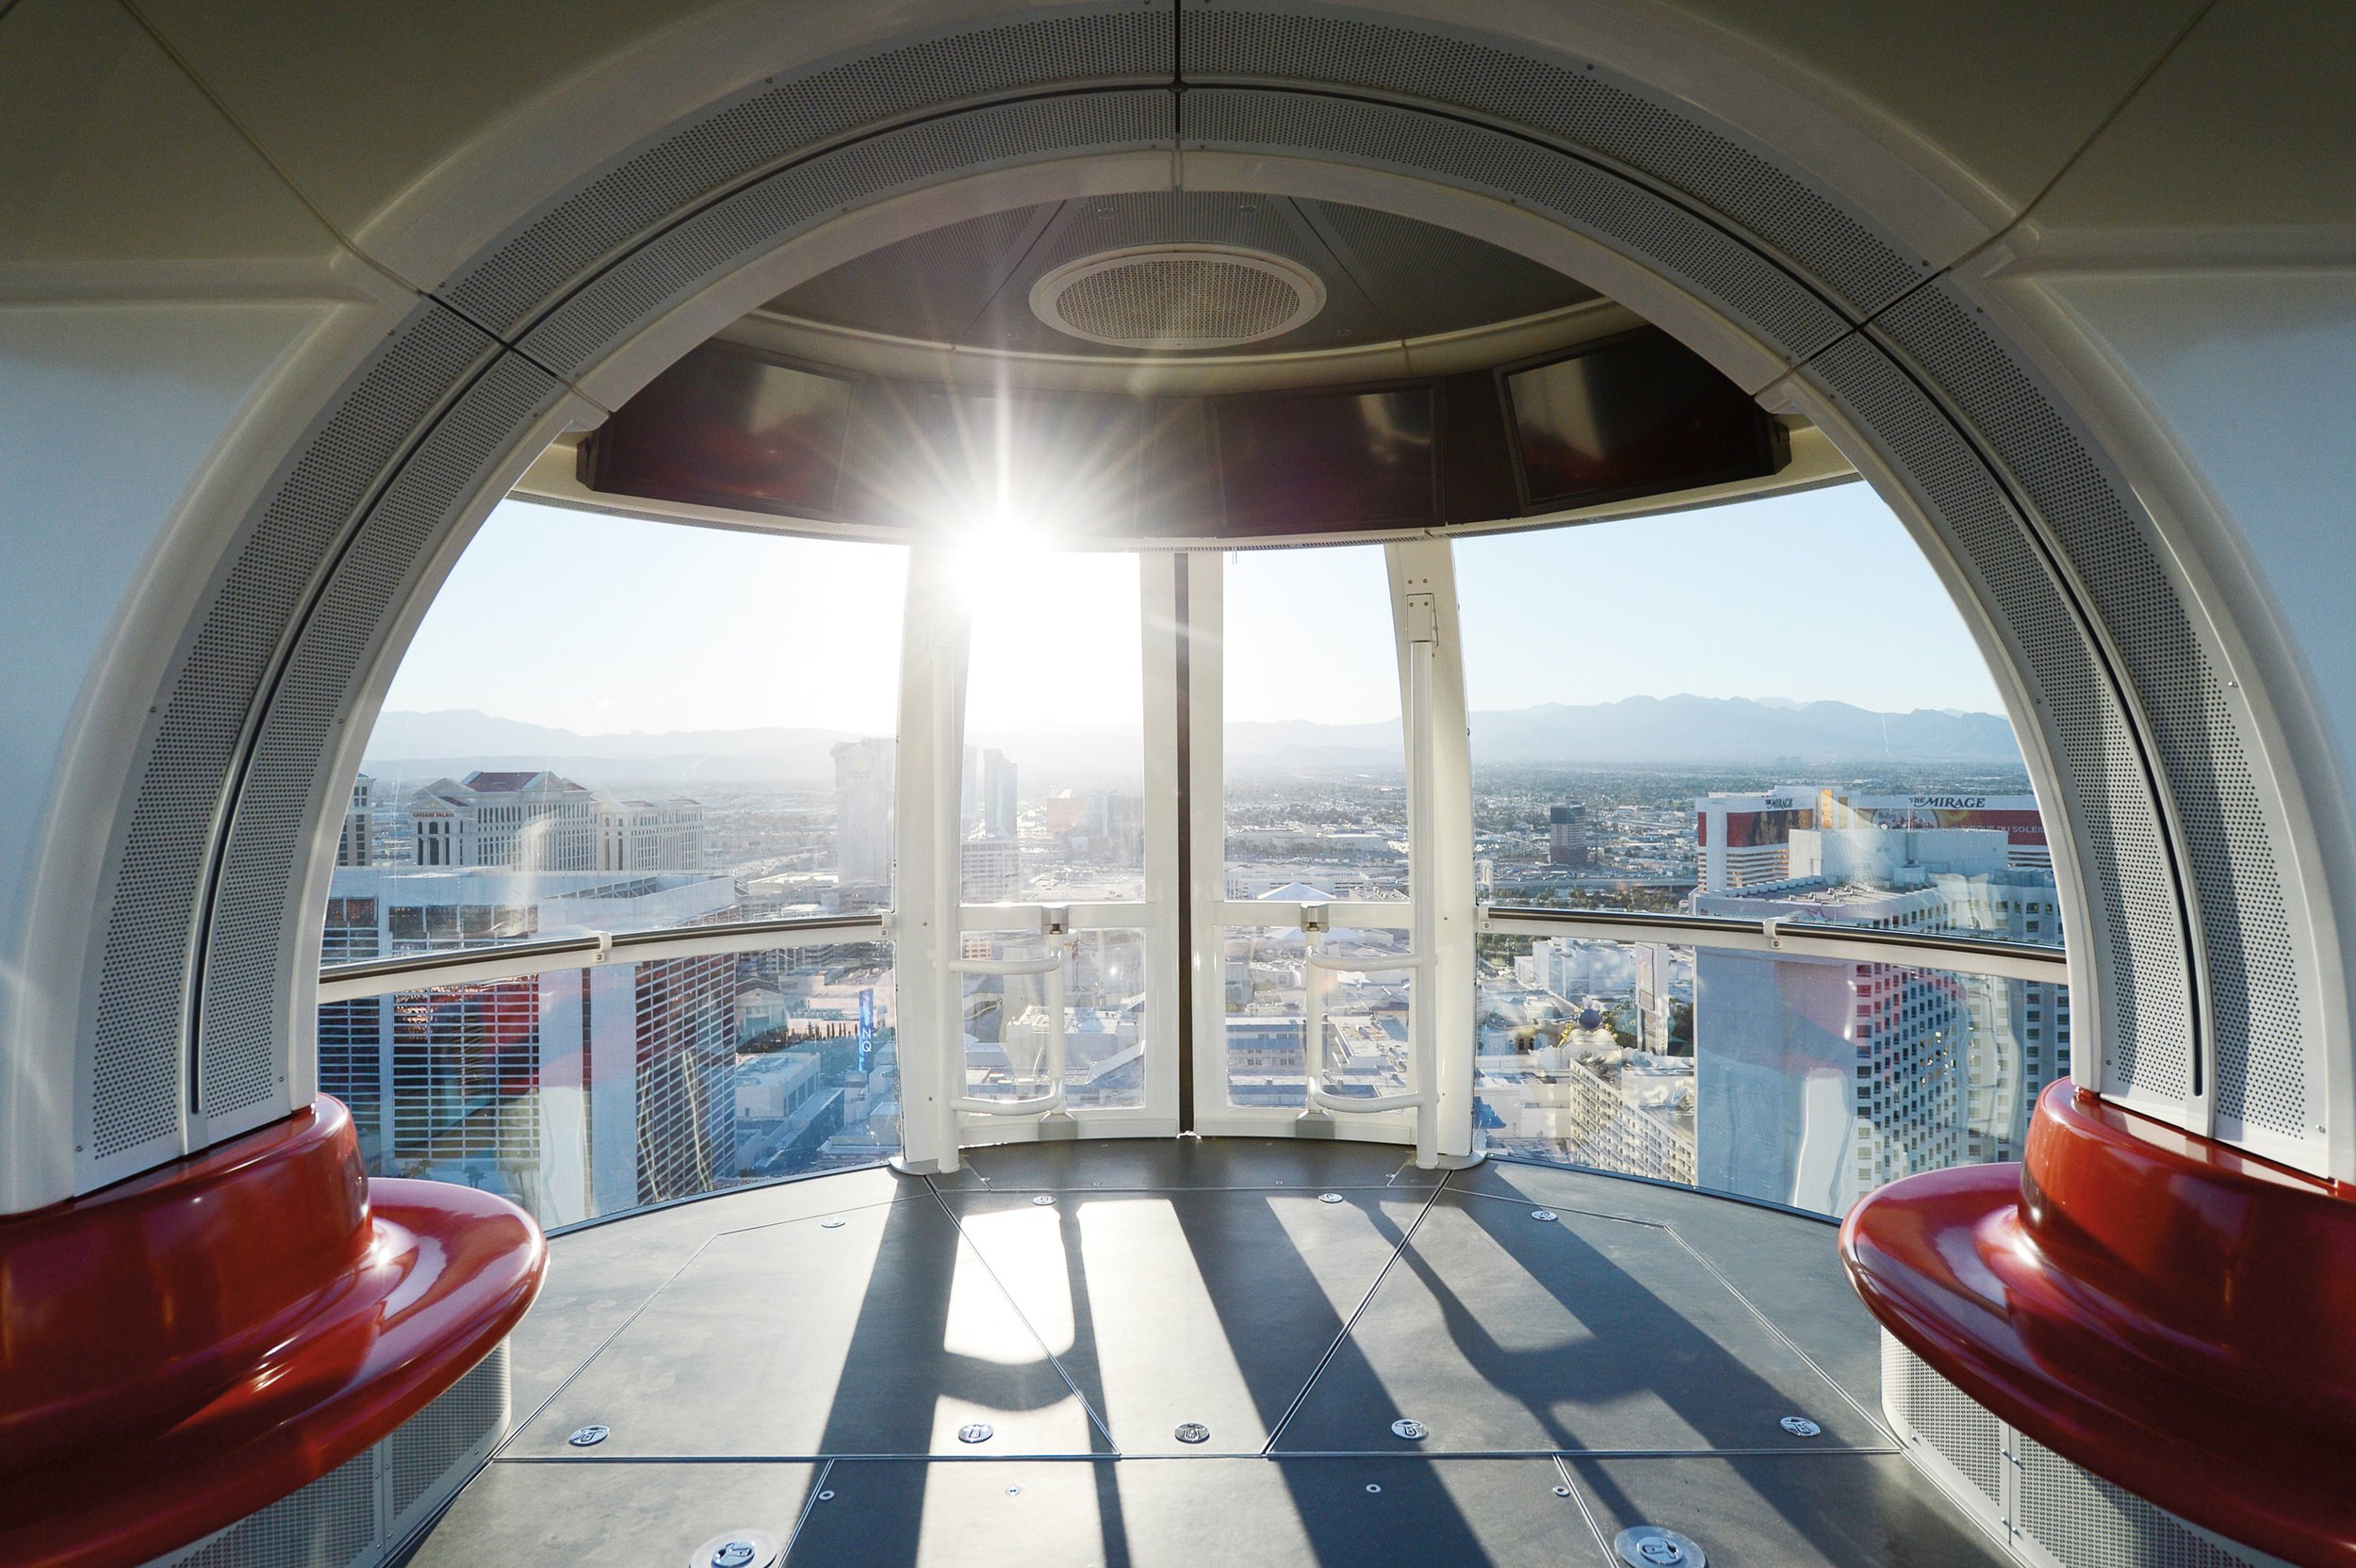  The High Roller at The LINQ Promenade offers a striking, bird’s eye view over the city.   Photo courtesy The LINQ  